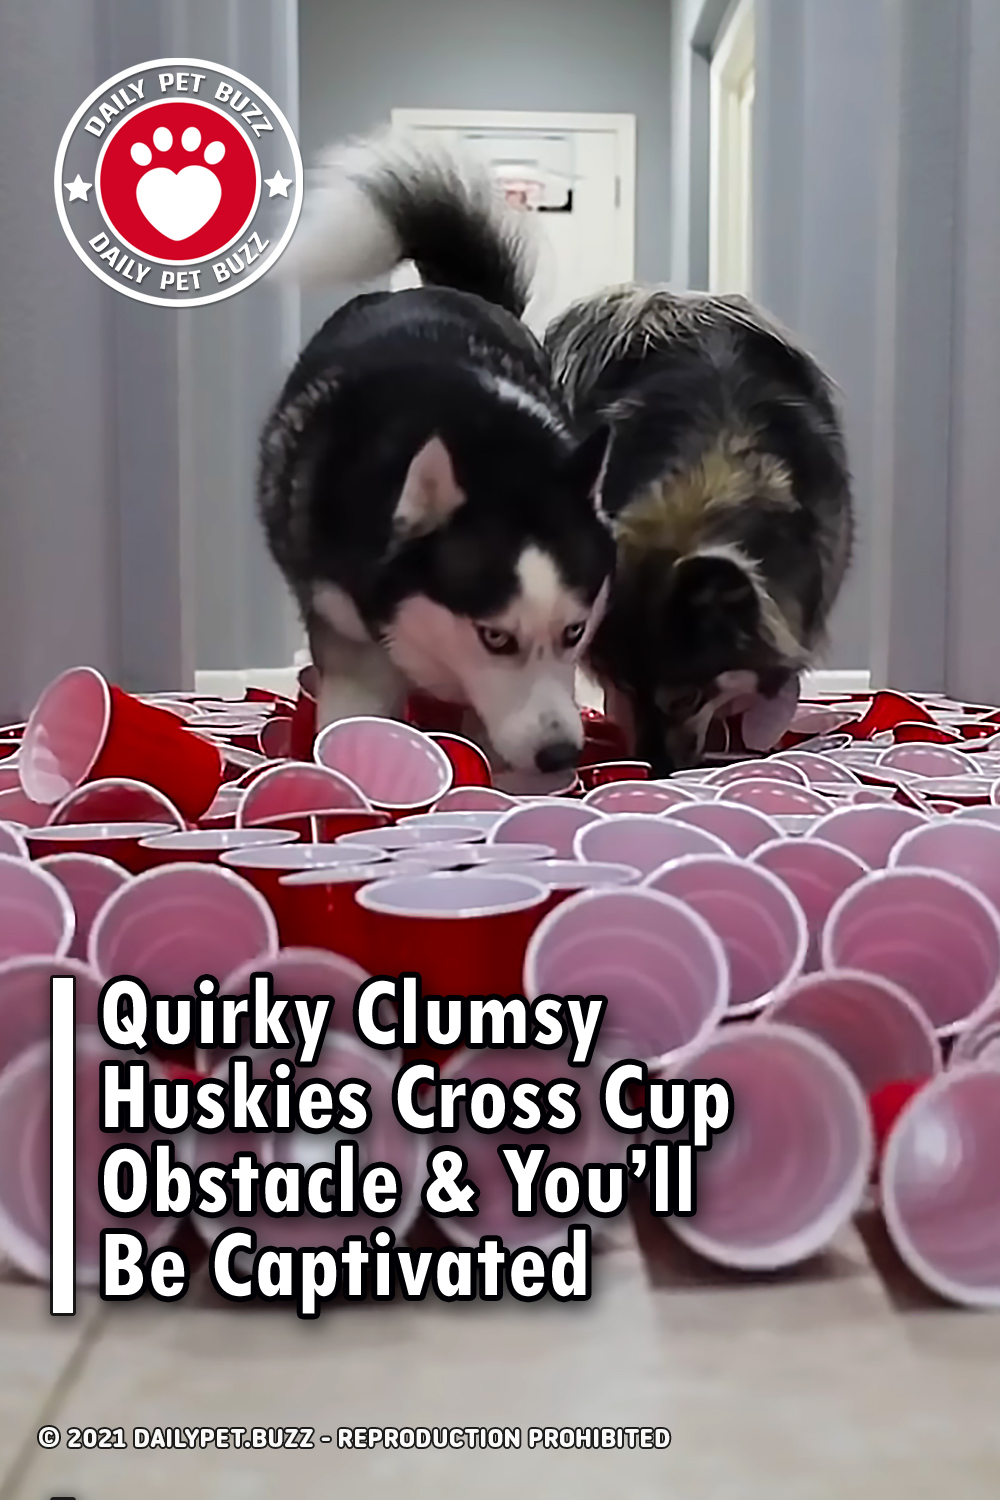 Quirky Clumsy Huskies Cross Cup Obstacle & You’ll Be Captivated